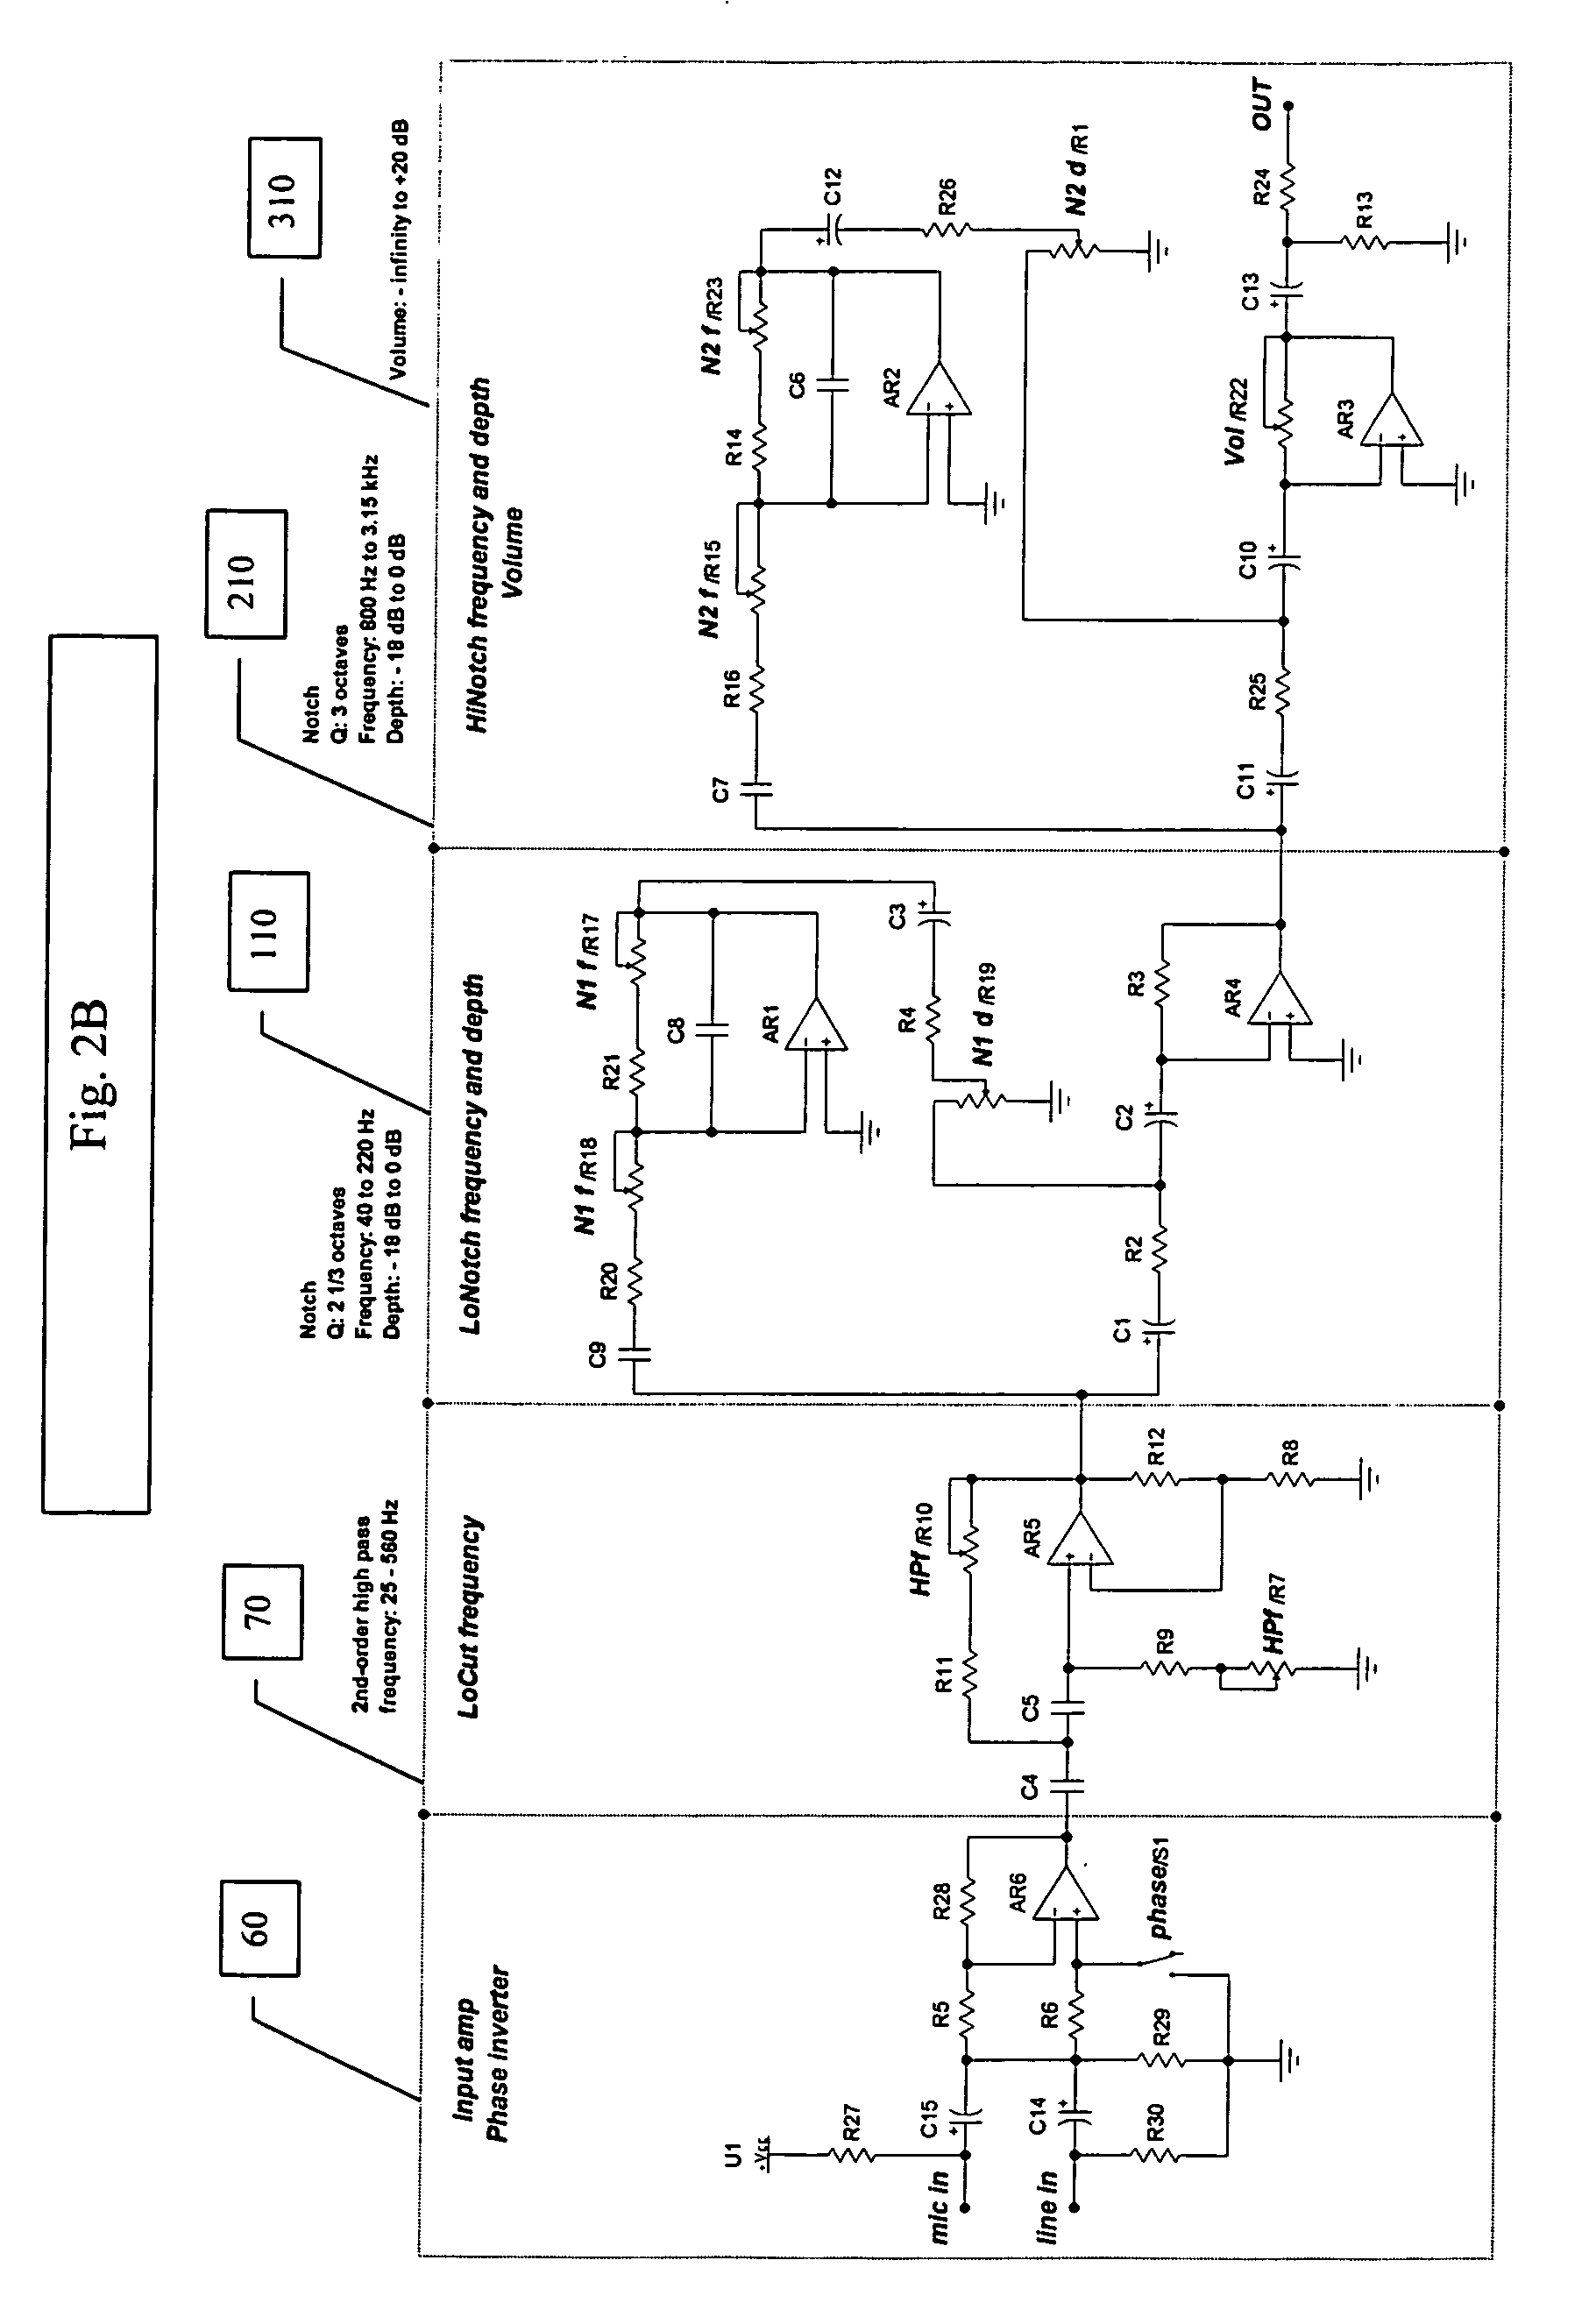 Microphone-tailored equalizing system